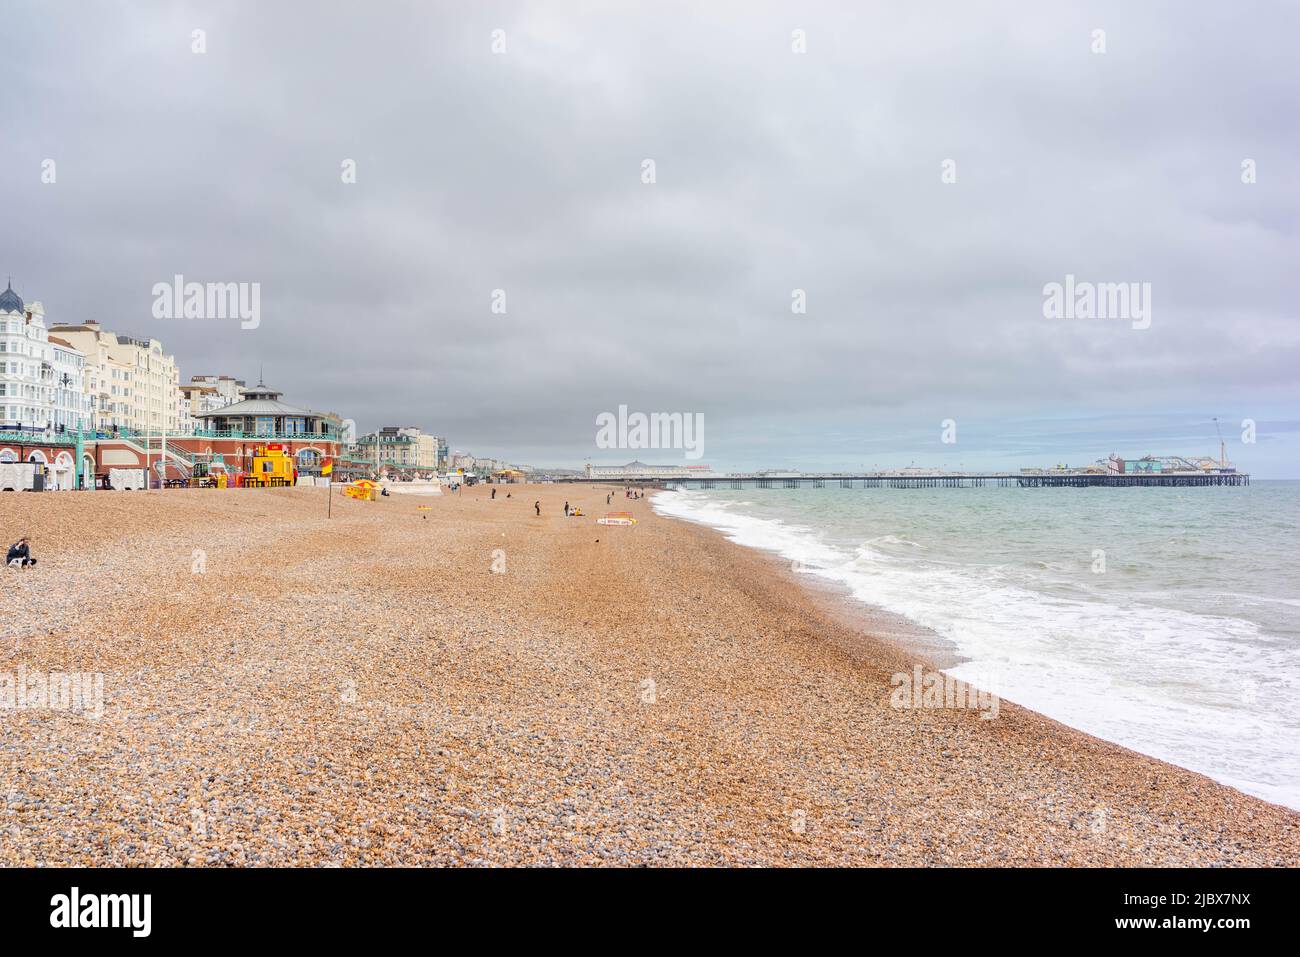 Brighton beach / seafront with view towards Brighton Palace Pier, East Sussex, England, UK Stock Photo